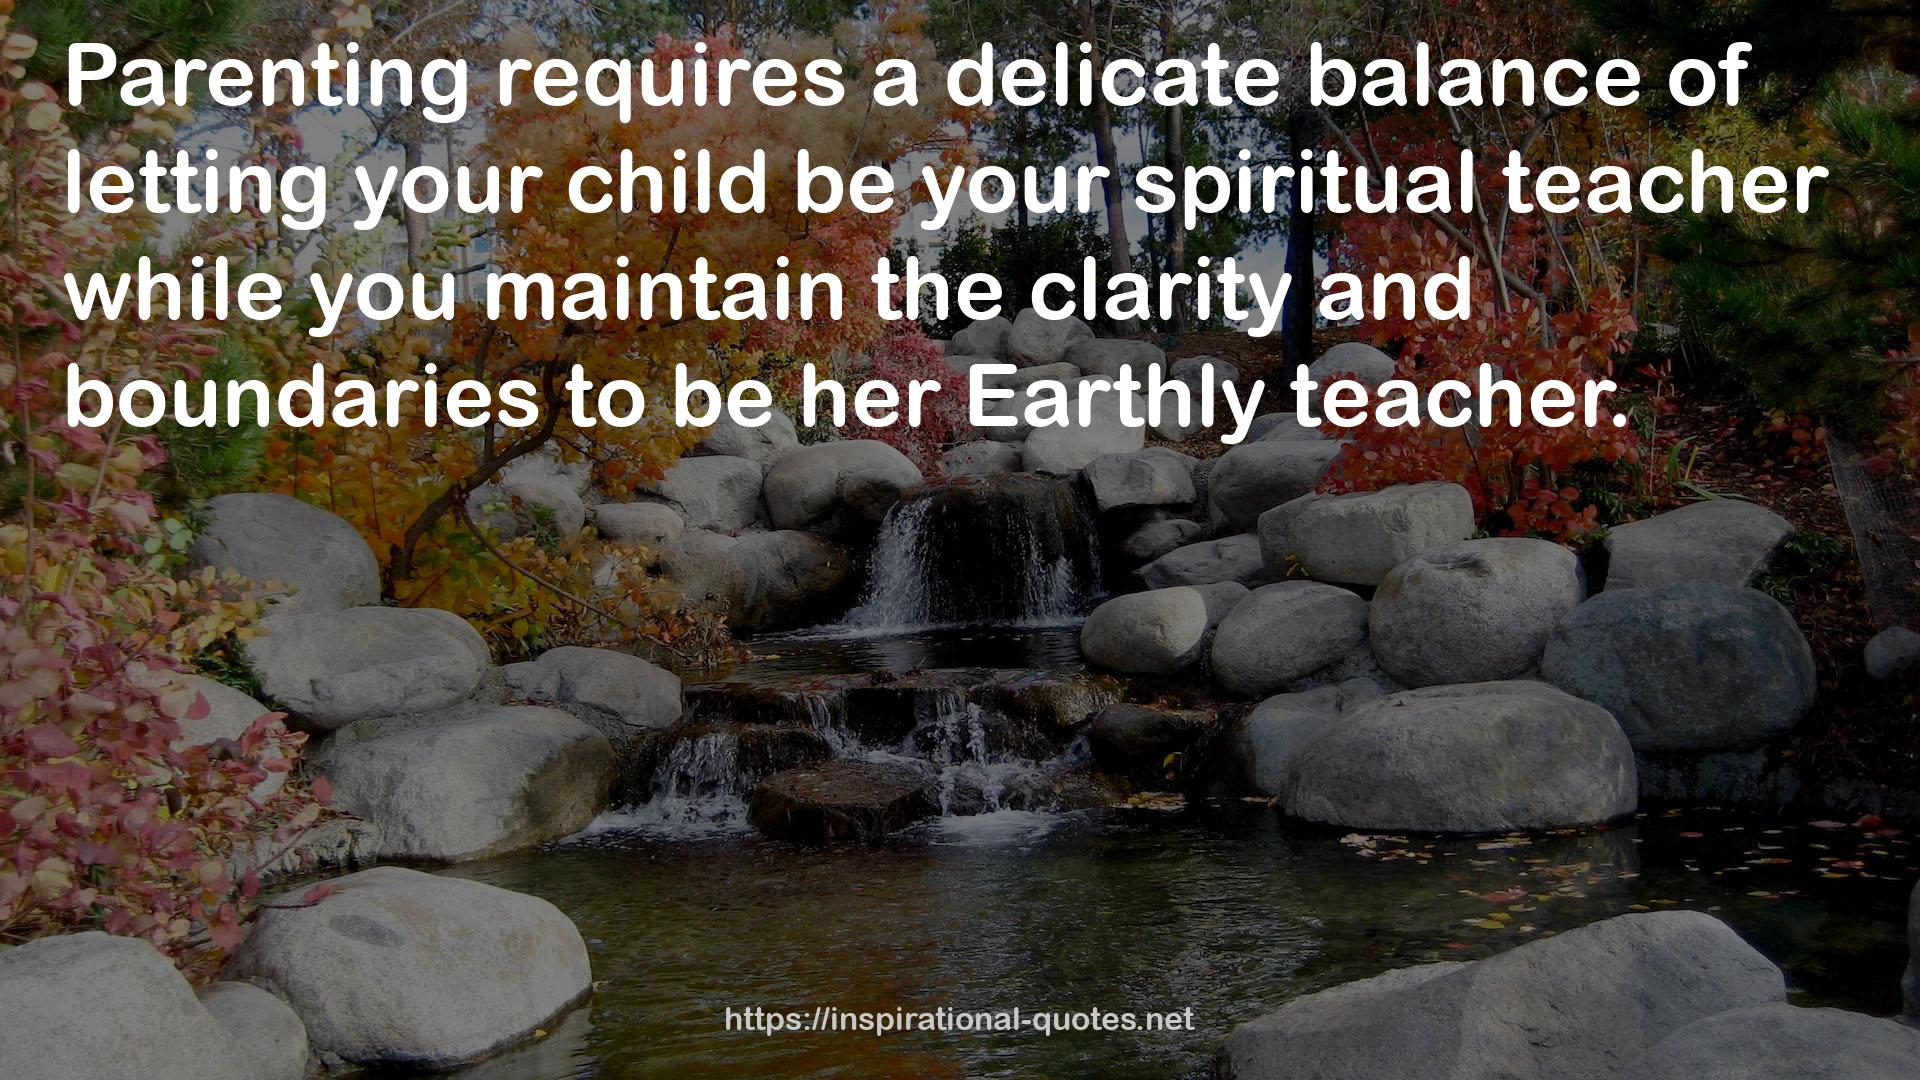 a delicate balance  QUOTES